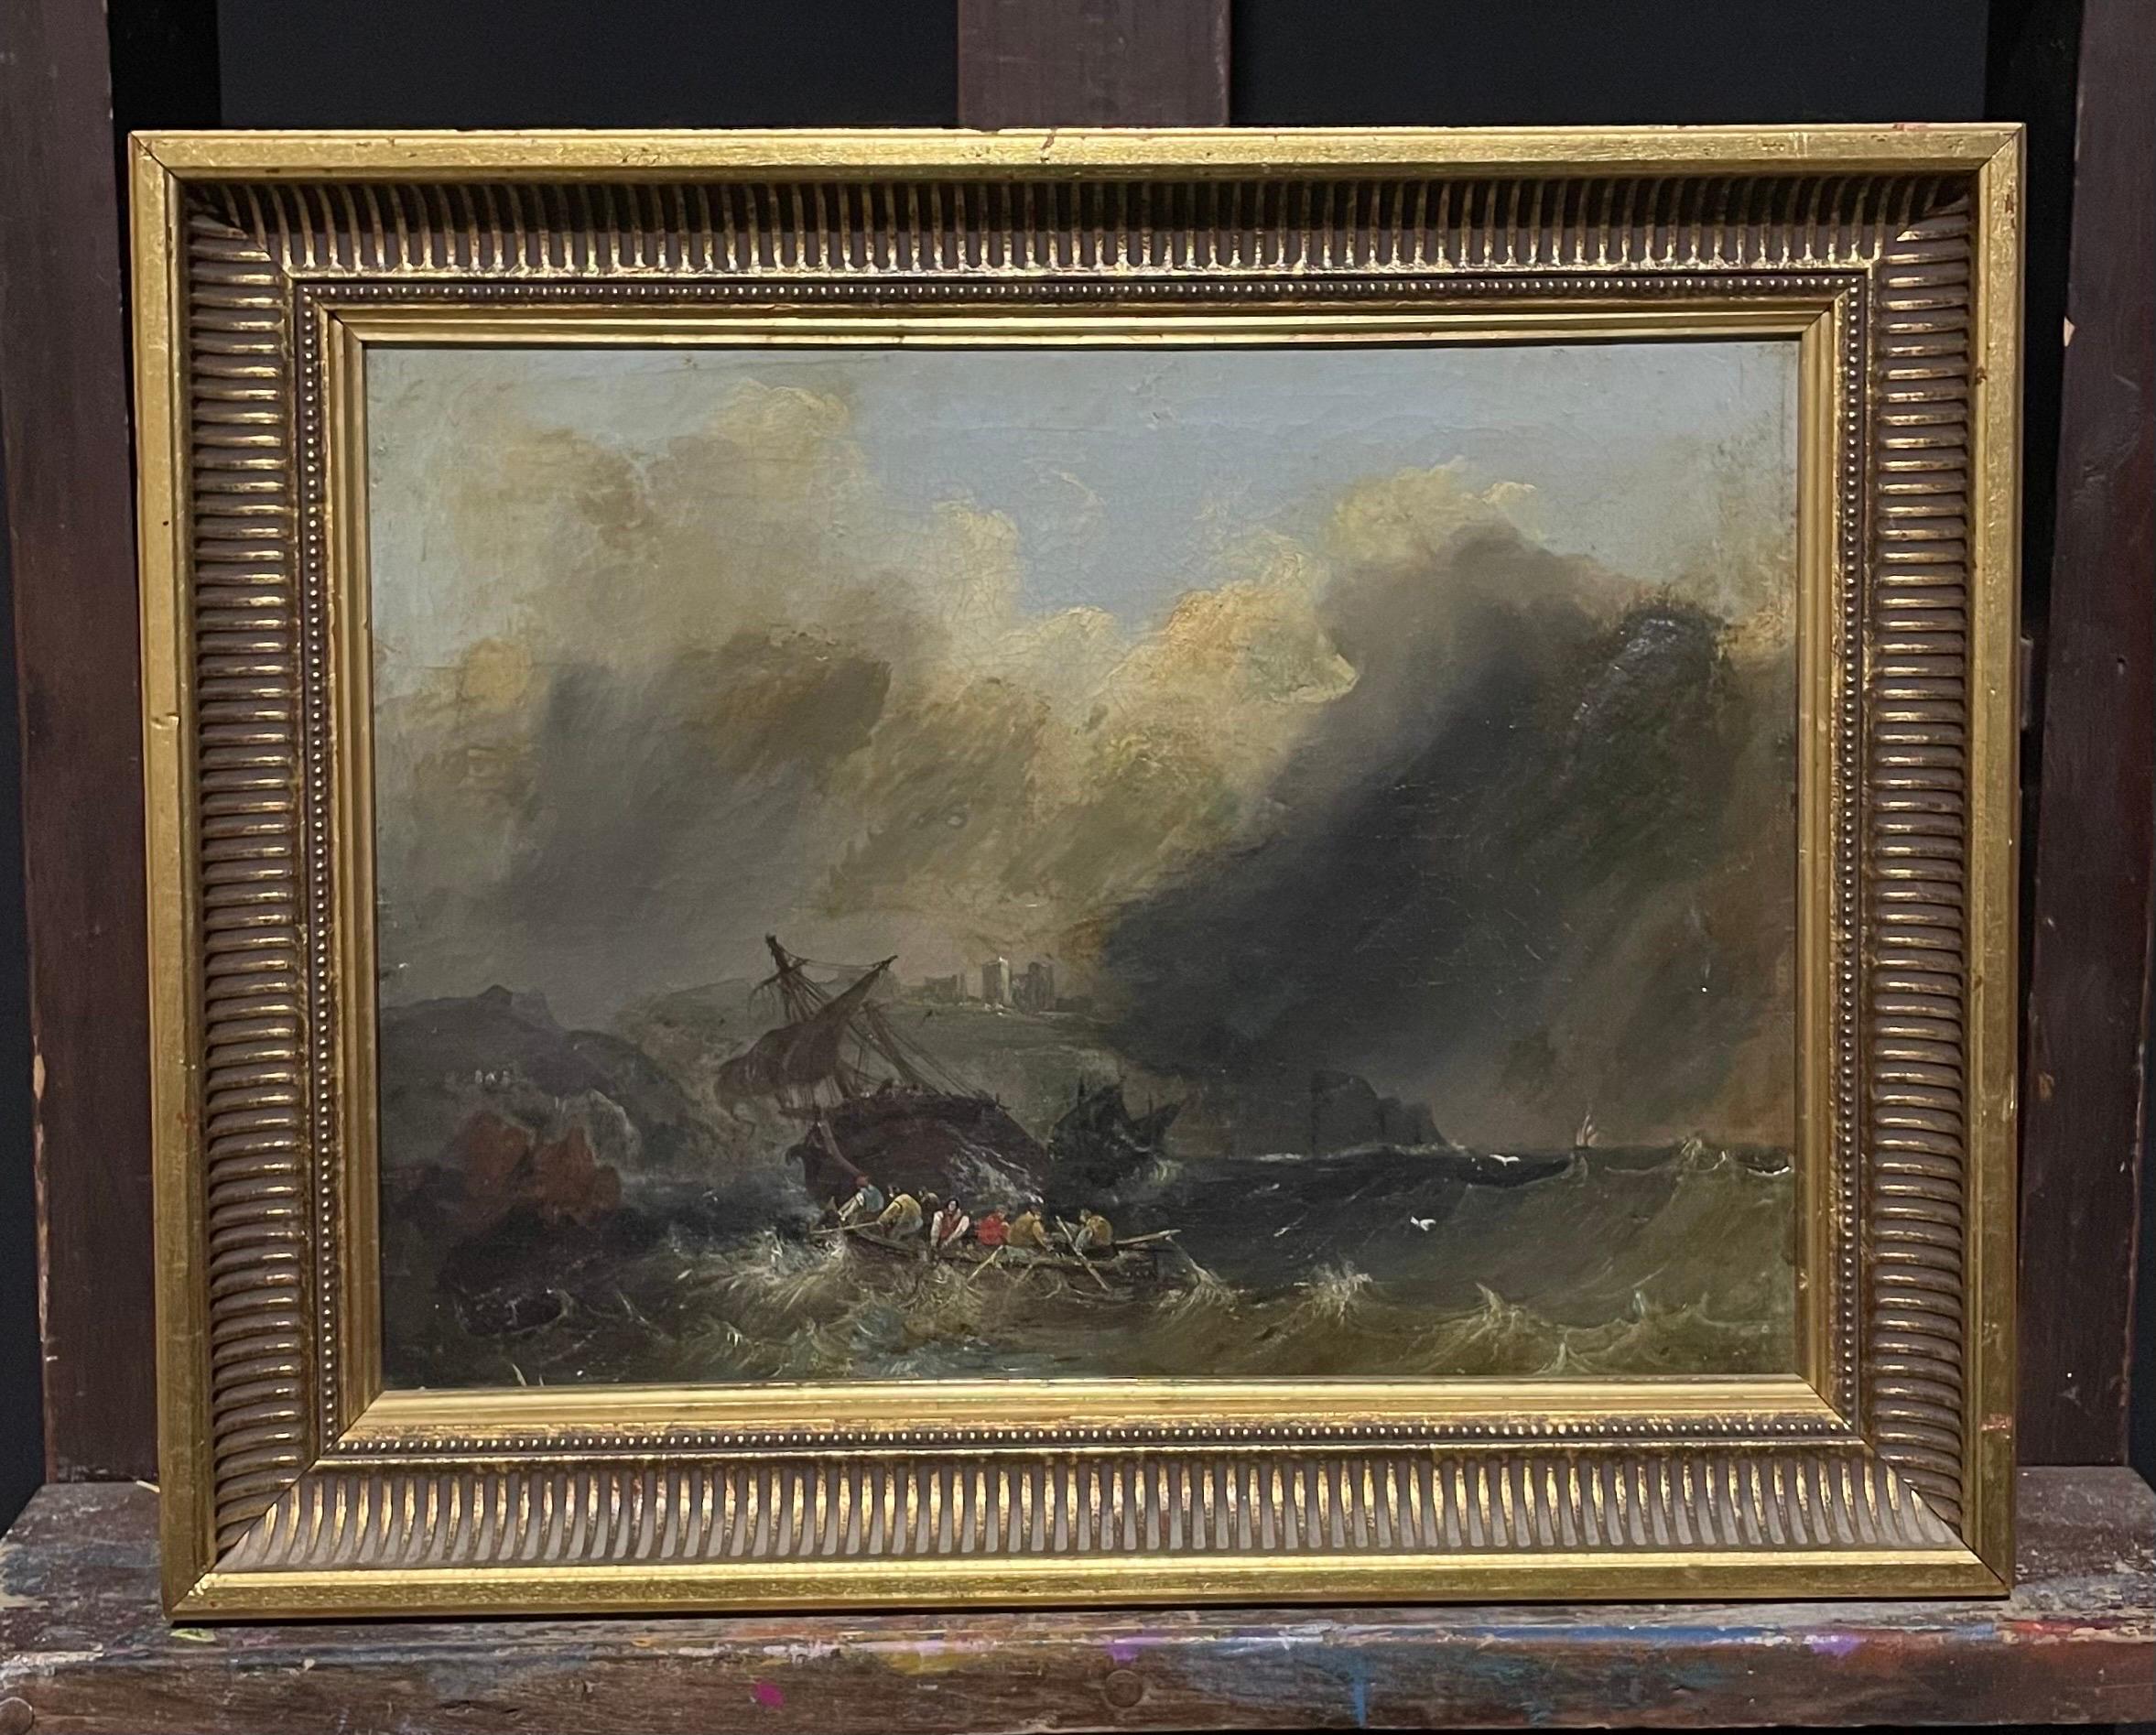 Antique British Marine Oil Painting Sailors in a Shipwreck Storm off the Coast - Gray Landscape Painting by British Victorian